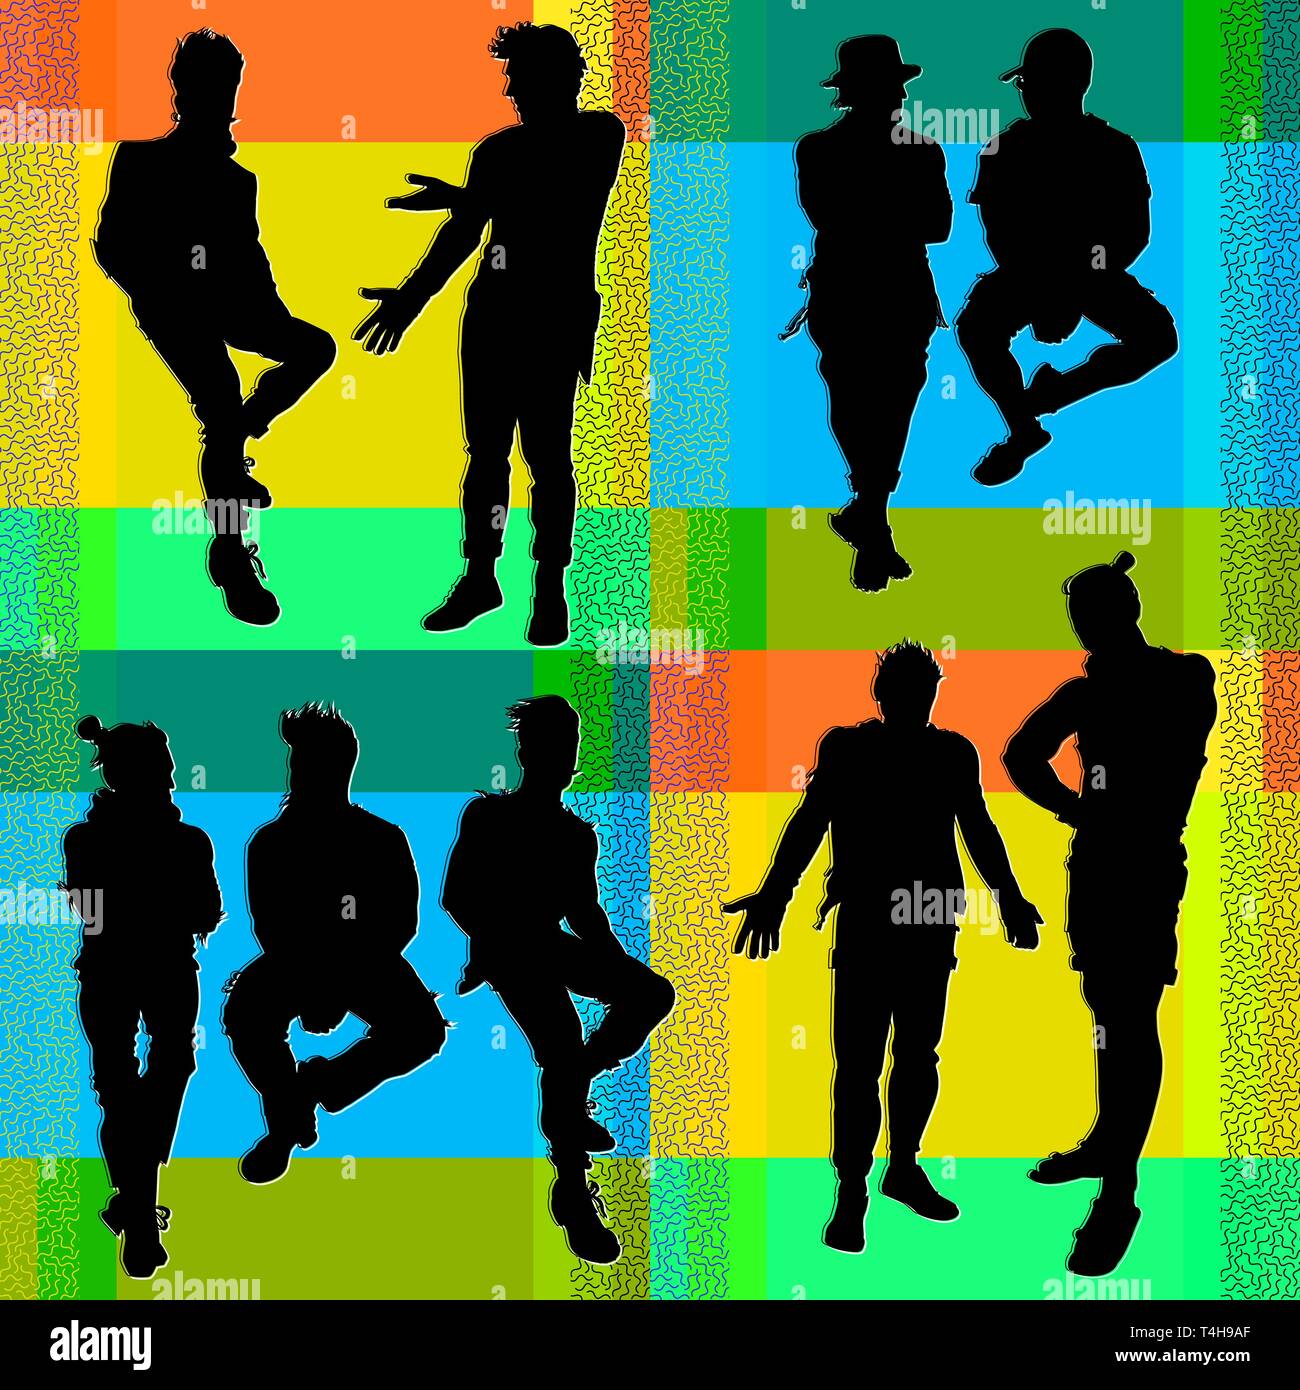 Collection of vector silhouettes of men. Hipsters, young guys in city clothes of different styles. Seated, standing, communicating. Templates for desi Stock Vector